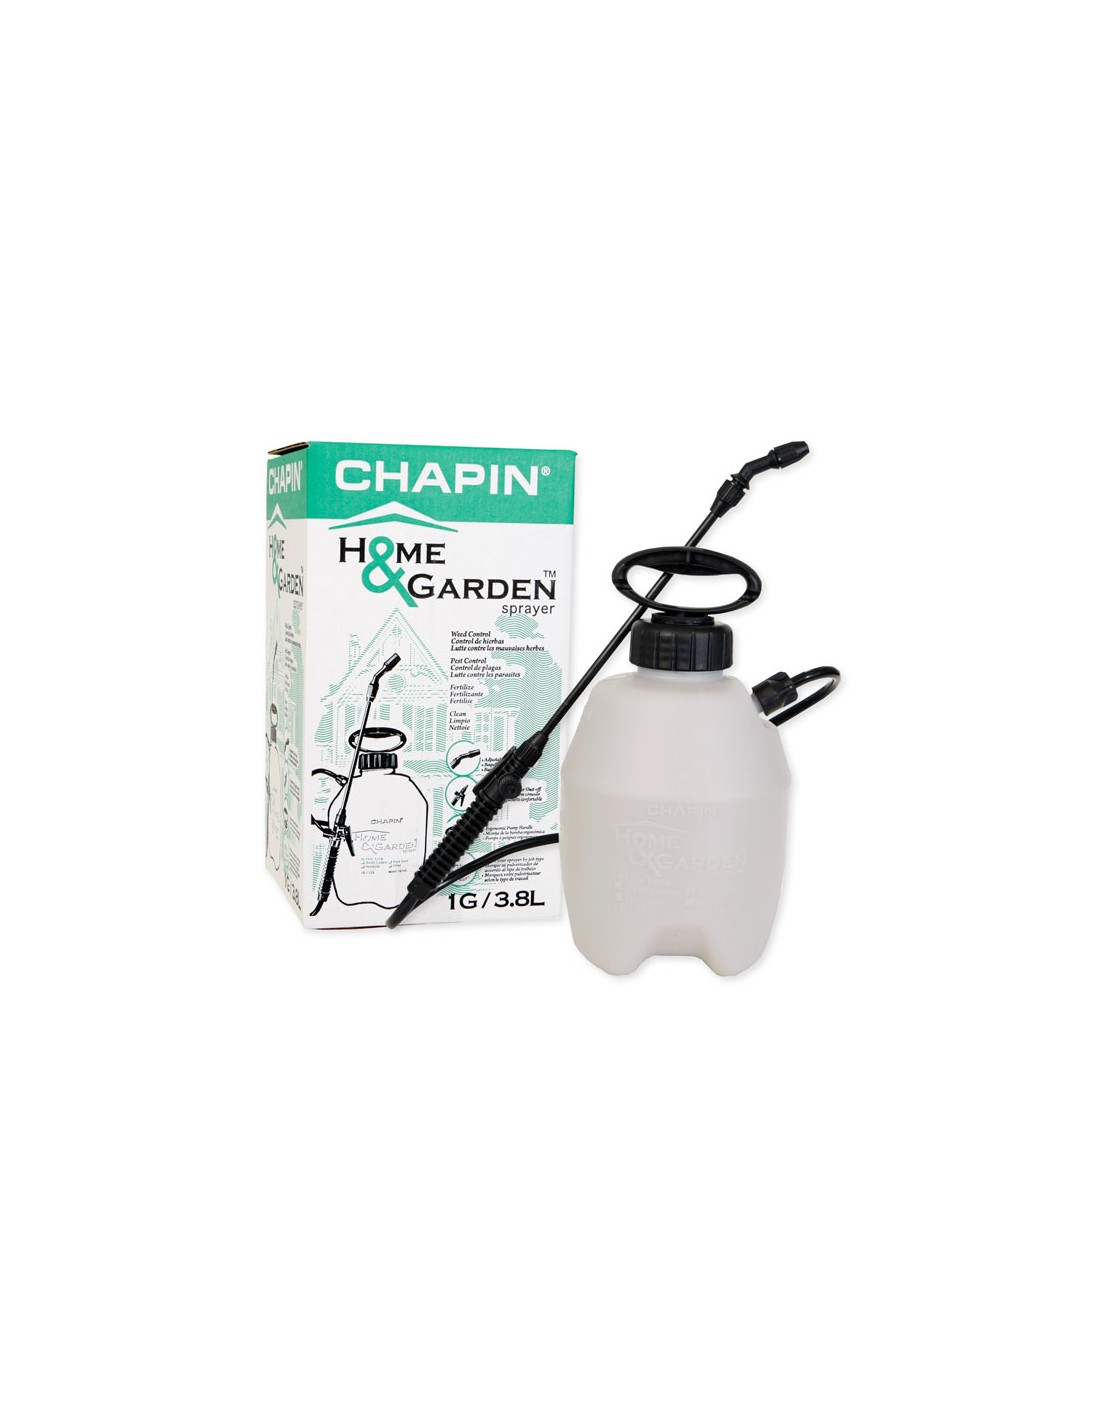 Chapin Sure Spray Lawn and Garden Sprayer Questions & Answers